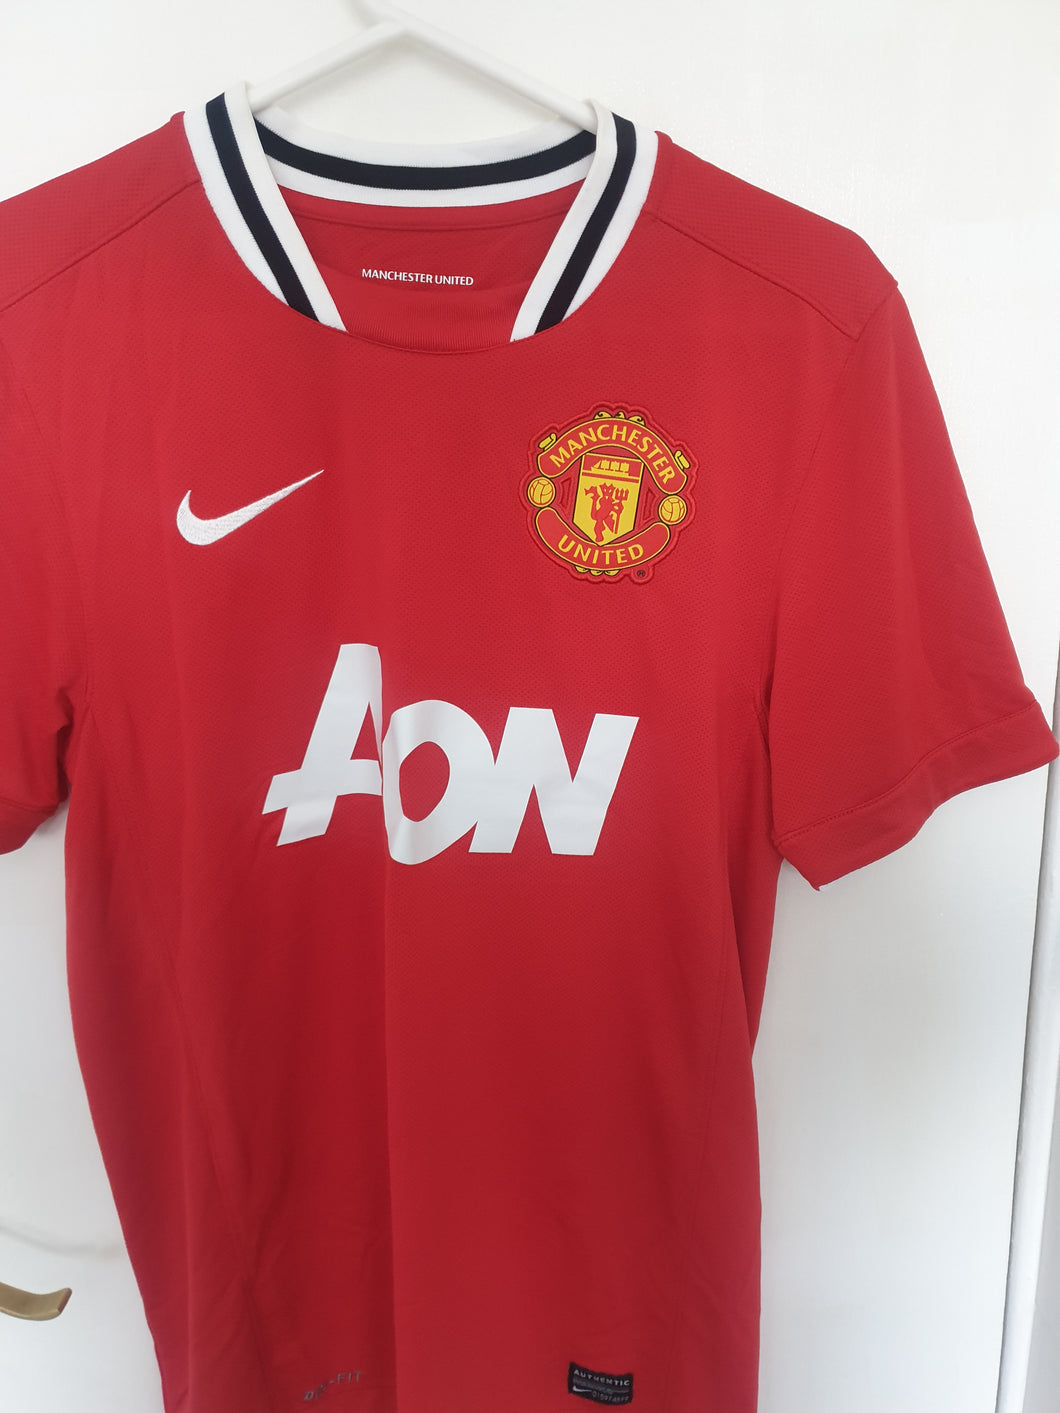 Manchester United 2011-2012 Home Shirt(Size Small)